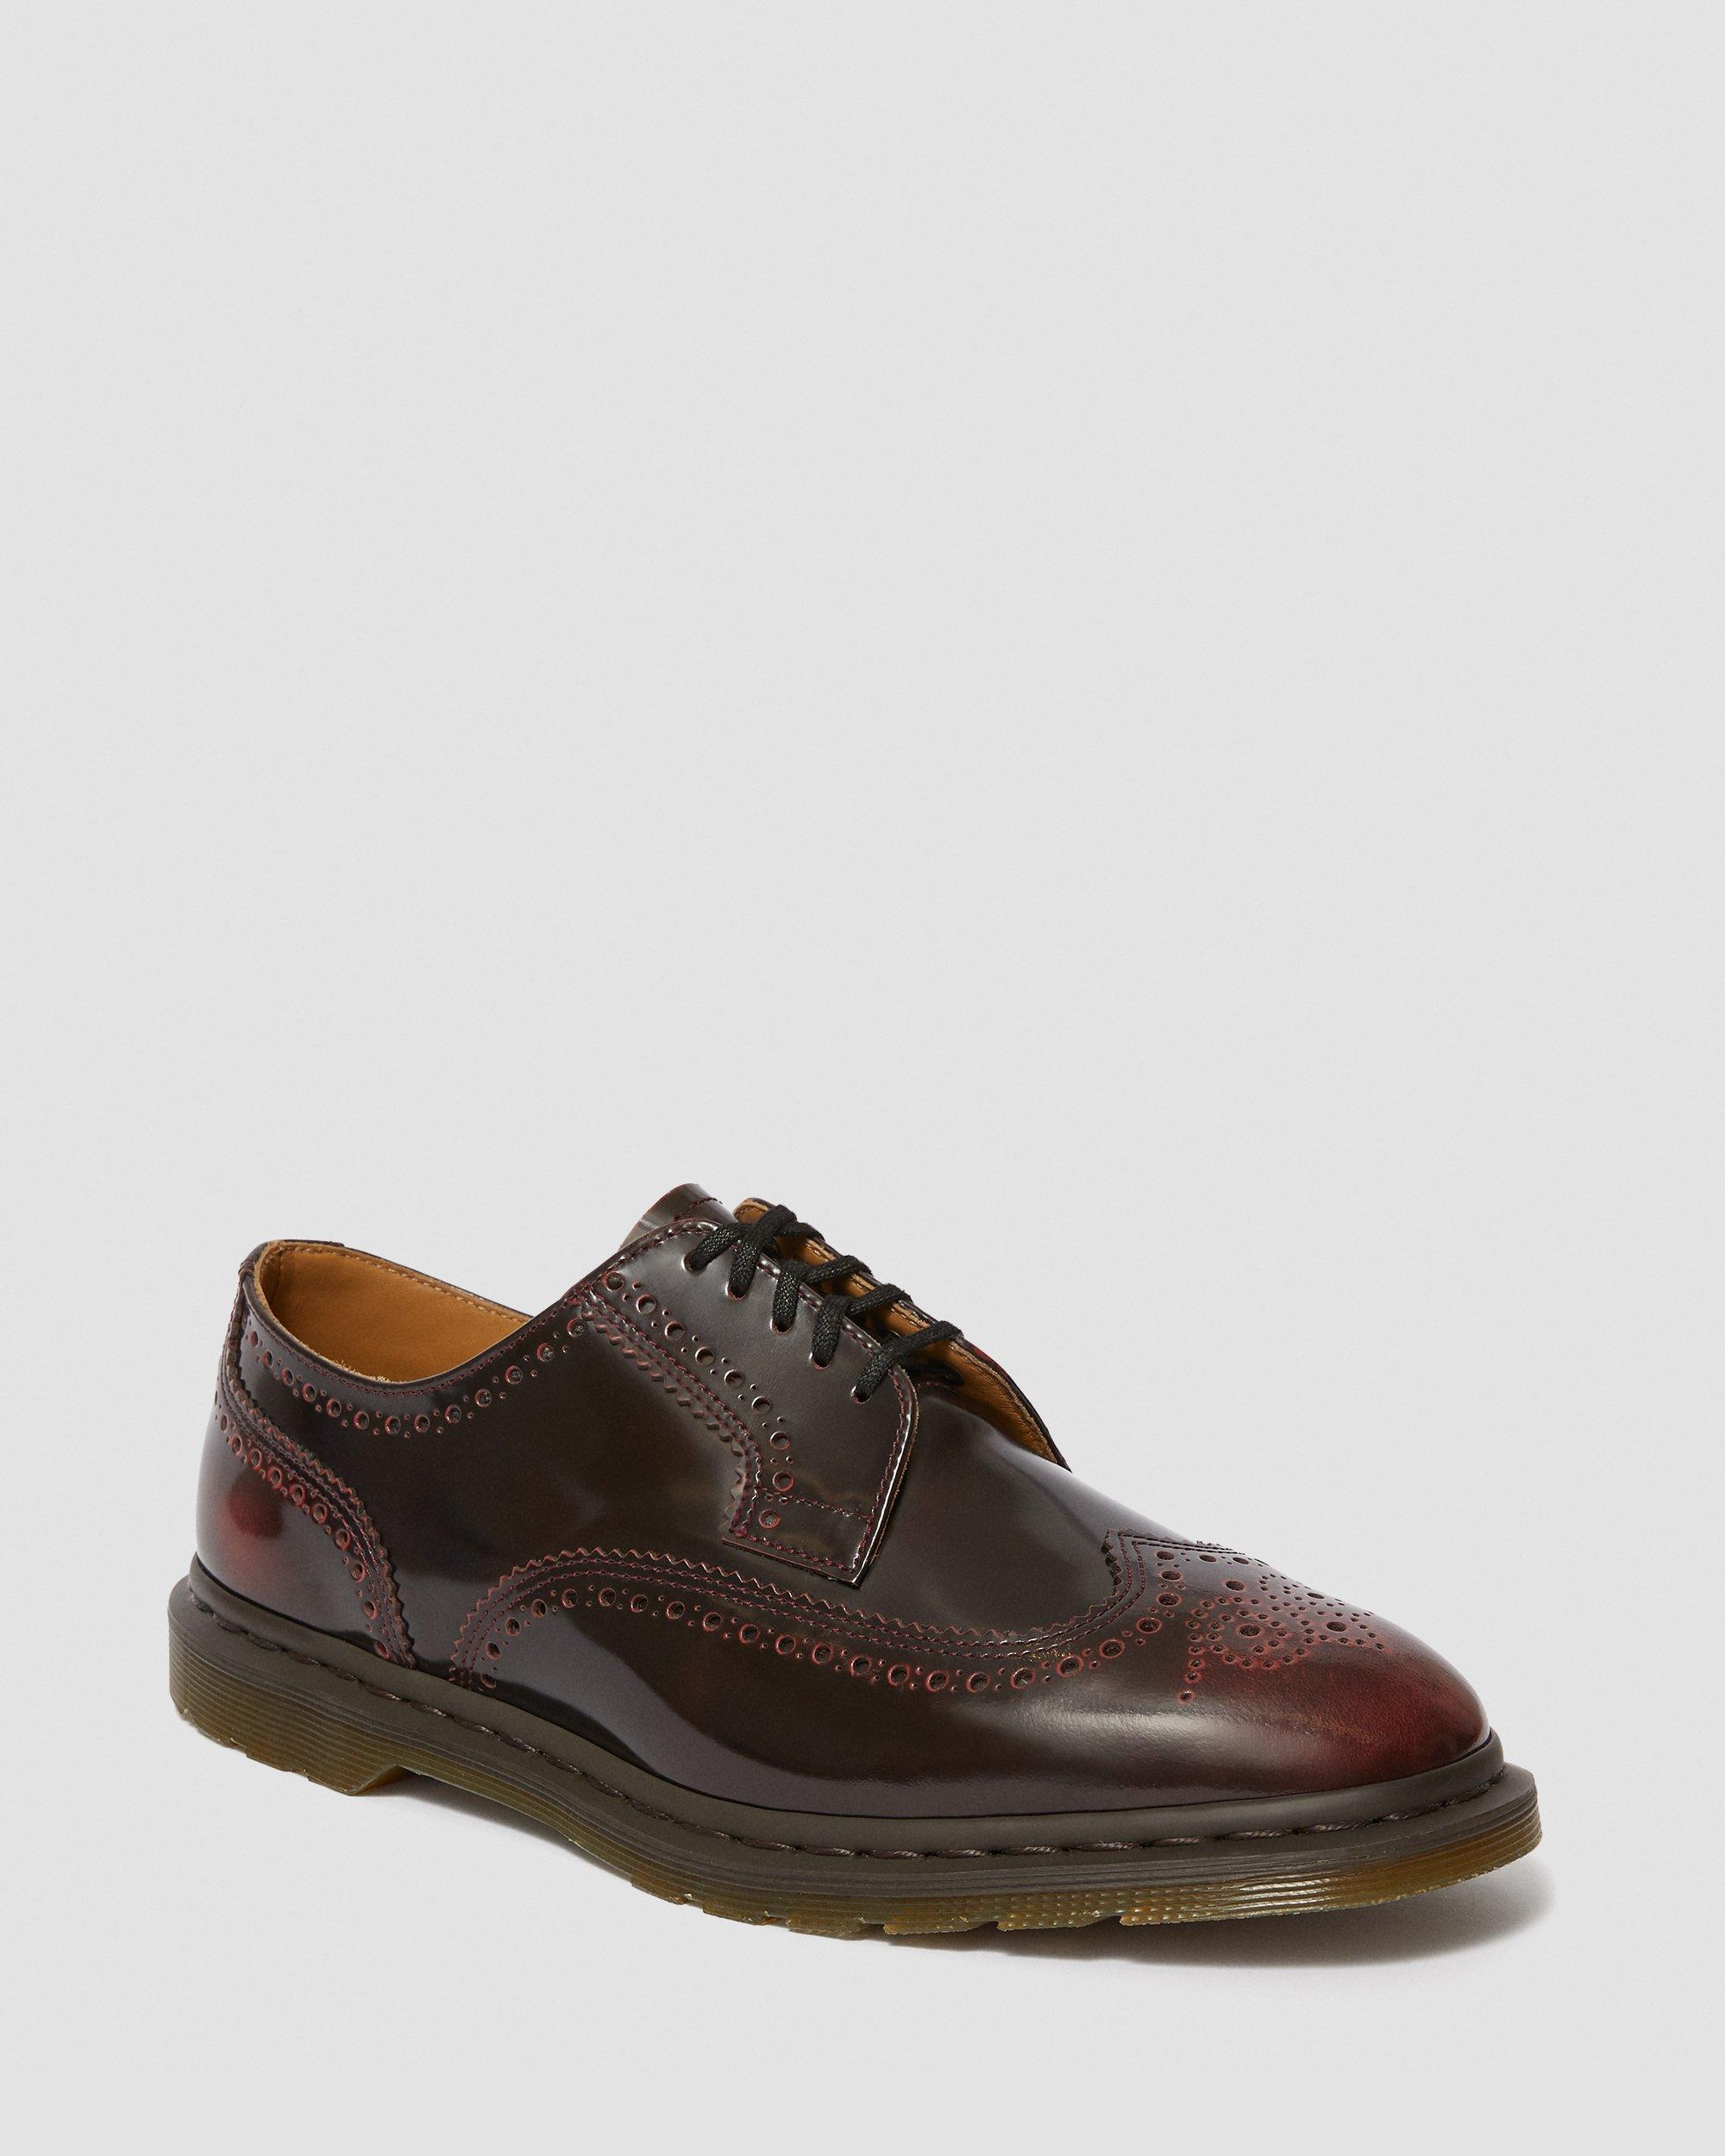 Kelvin II Arcadia Leather Brogue Shoes, Cherry Red | Dr. Martens